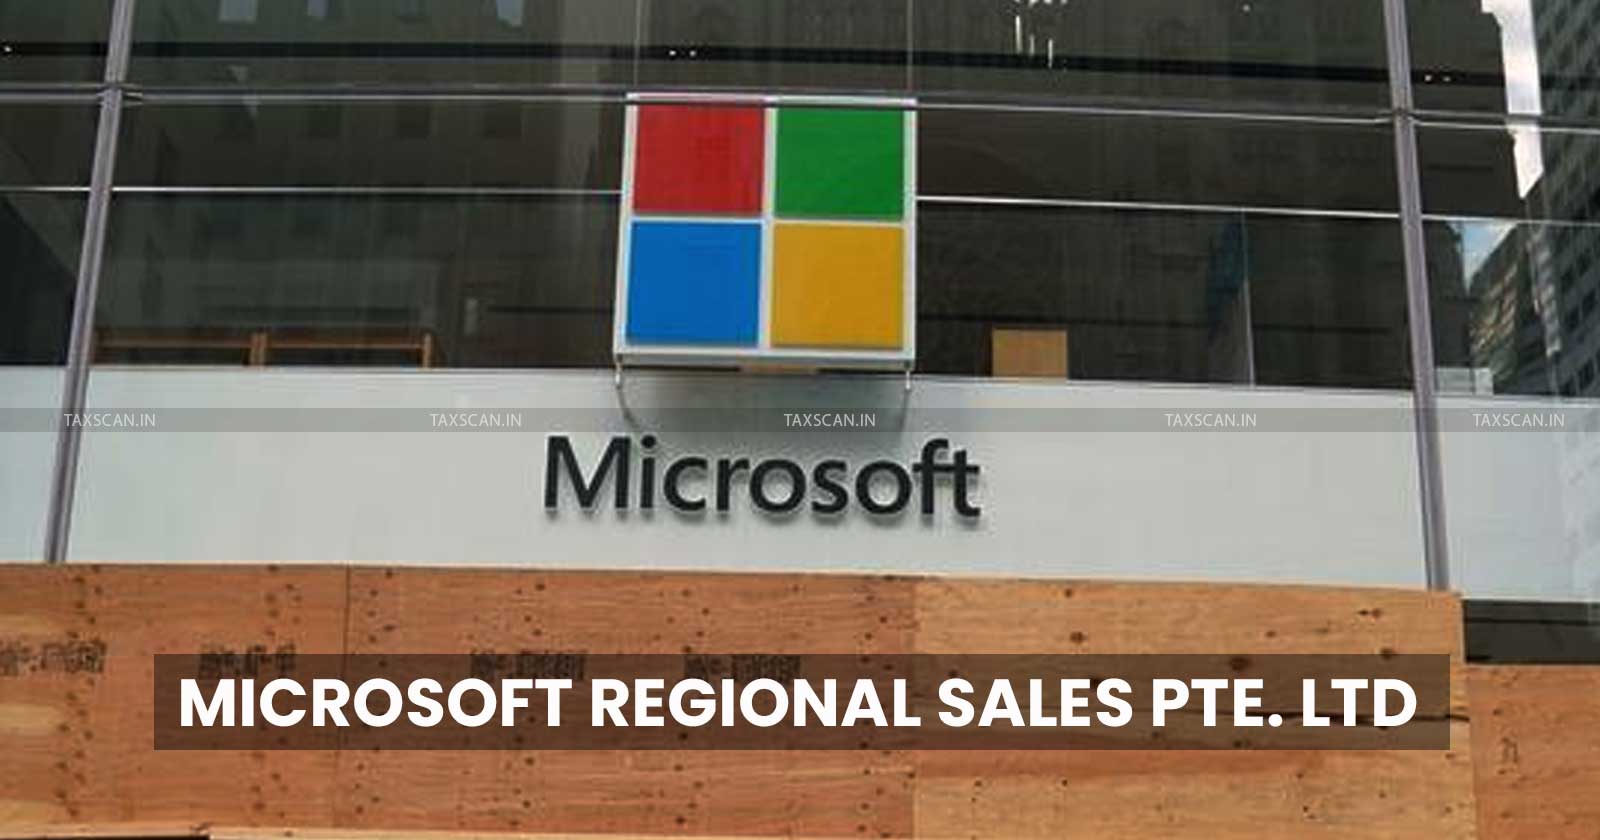 Microsoft Regional Sales - Mol - ITAT - Flip Flop - Legally Supported - Tax - Income - Income Tax - taxscan